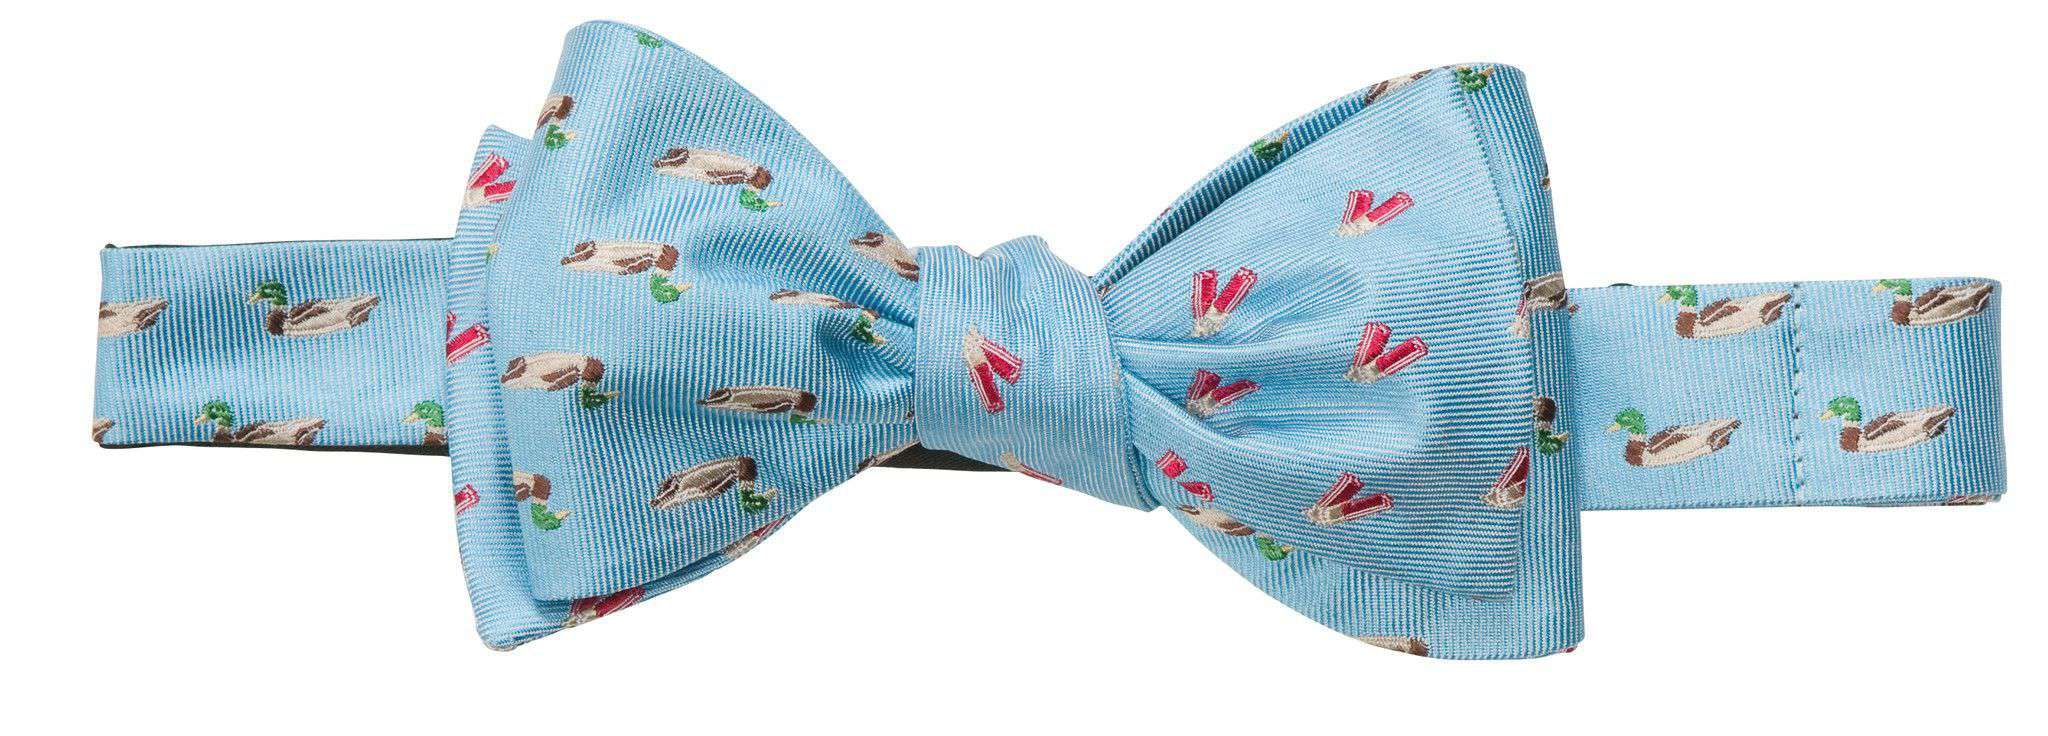 Ducks and Shells Bow Tie in Light Blue by Southern Proper - Country Club Prep